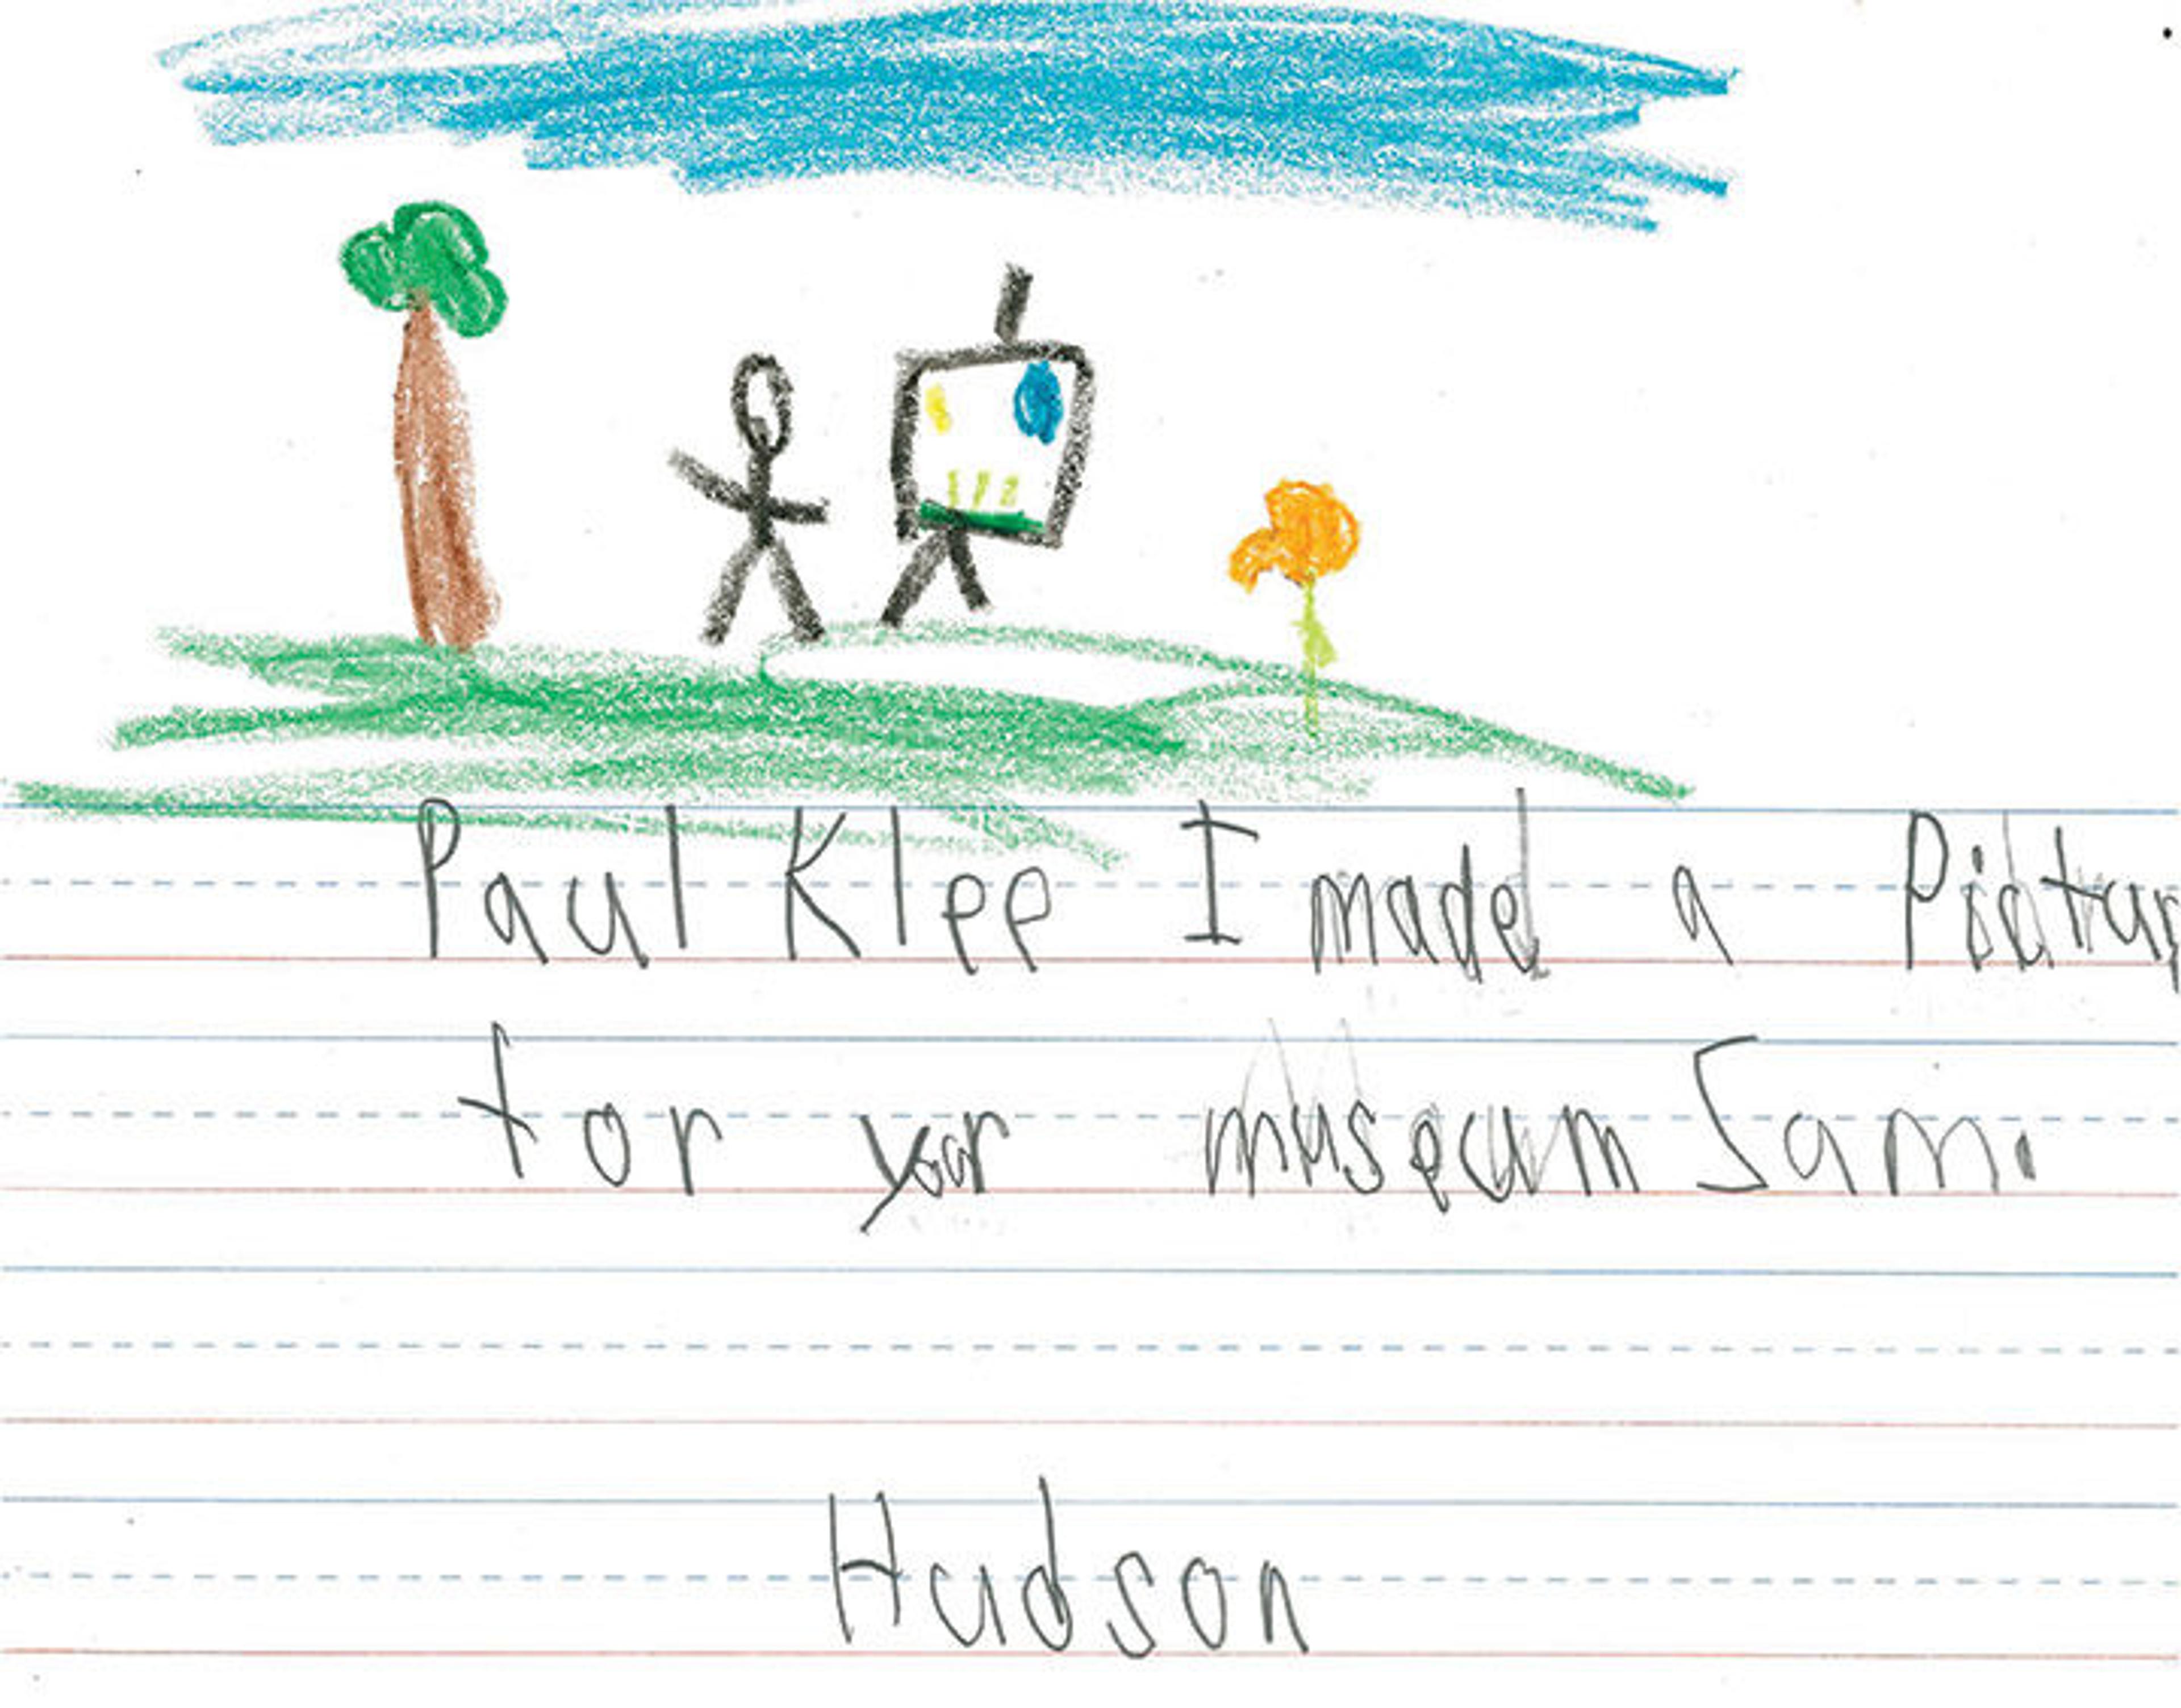 Hudson's letter to The Met about Paul Klee